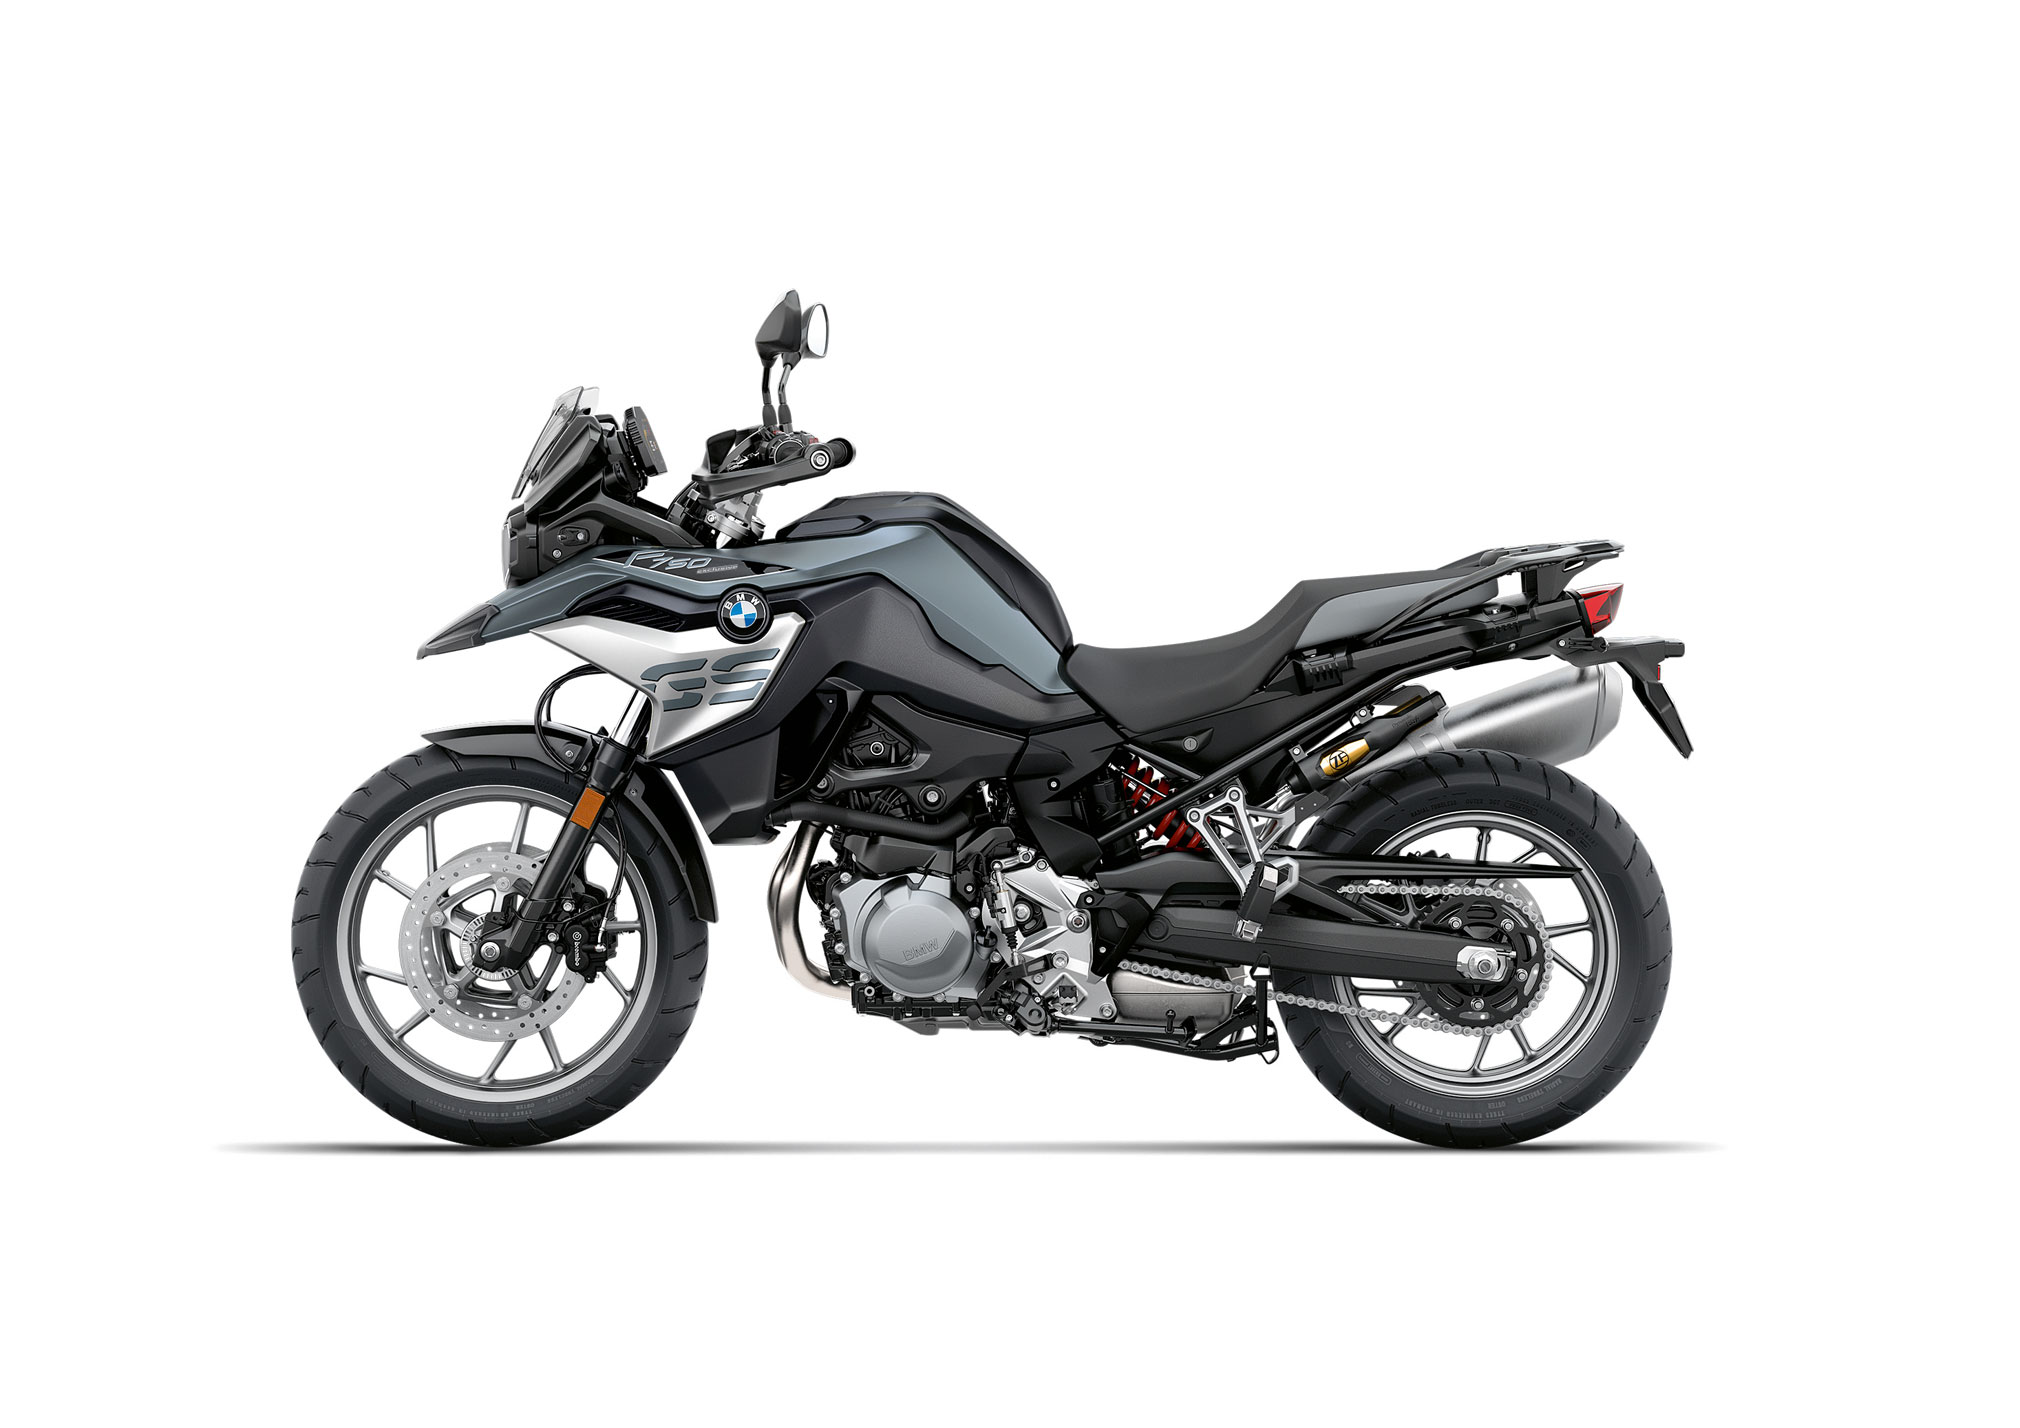 2020 BMW F750GS Guide • Total Motorcycle